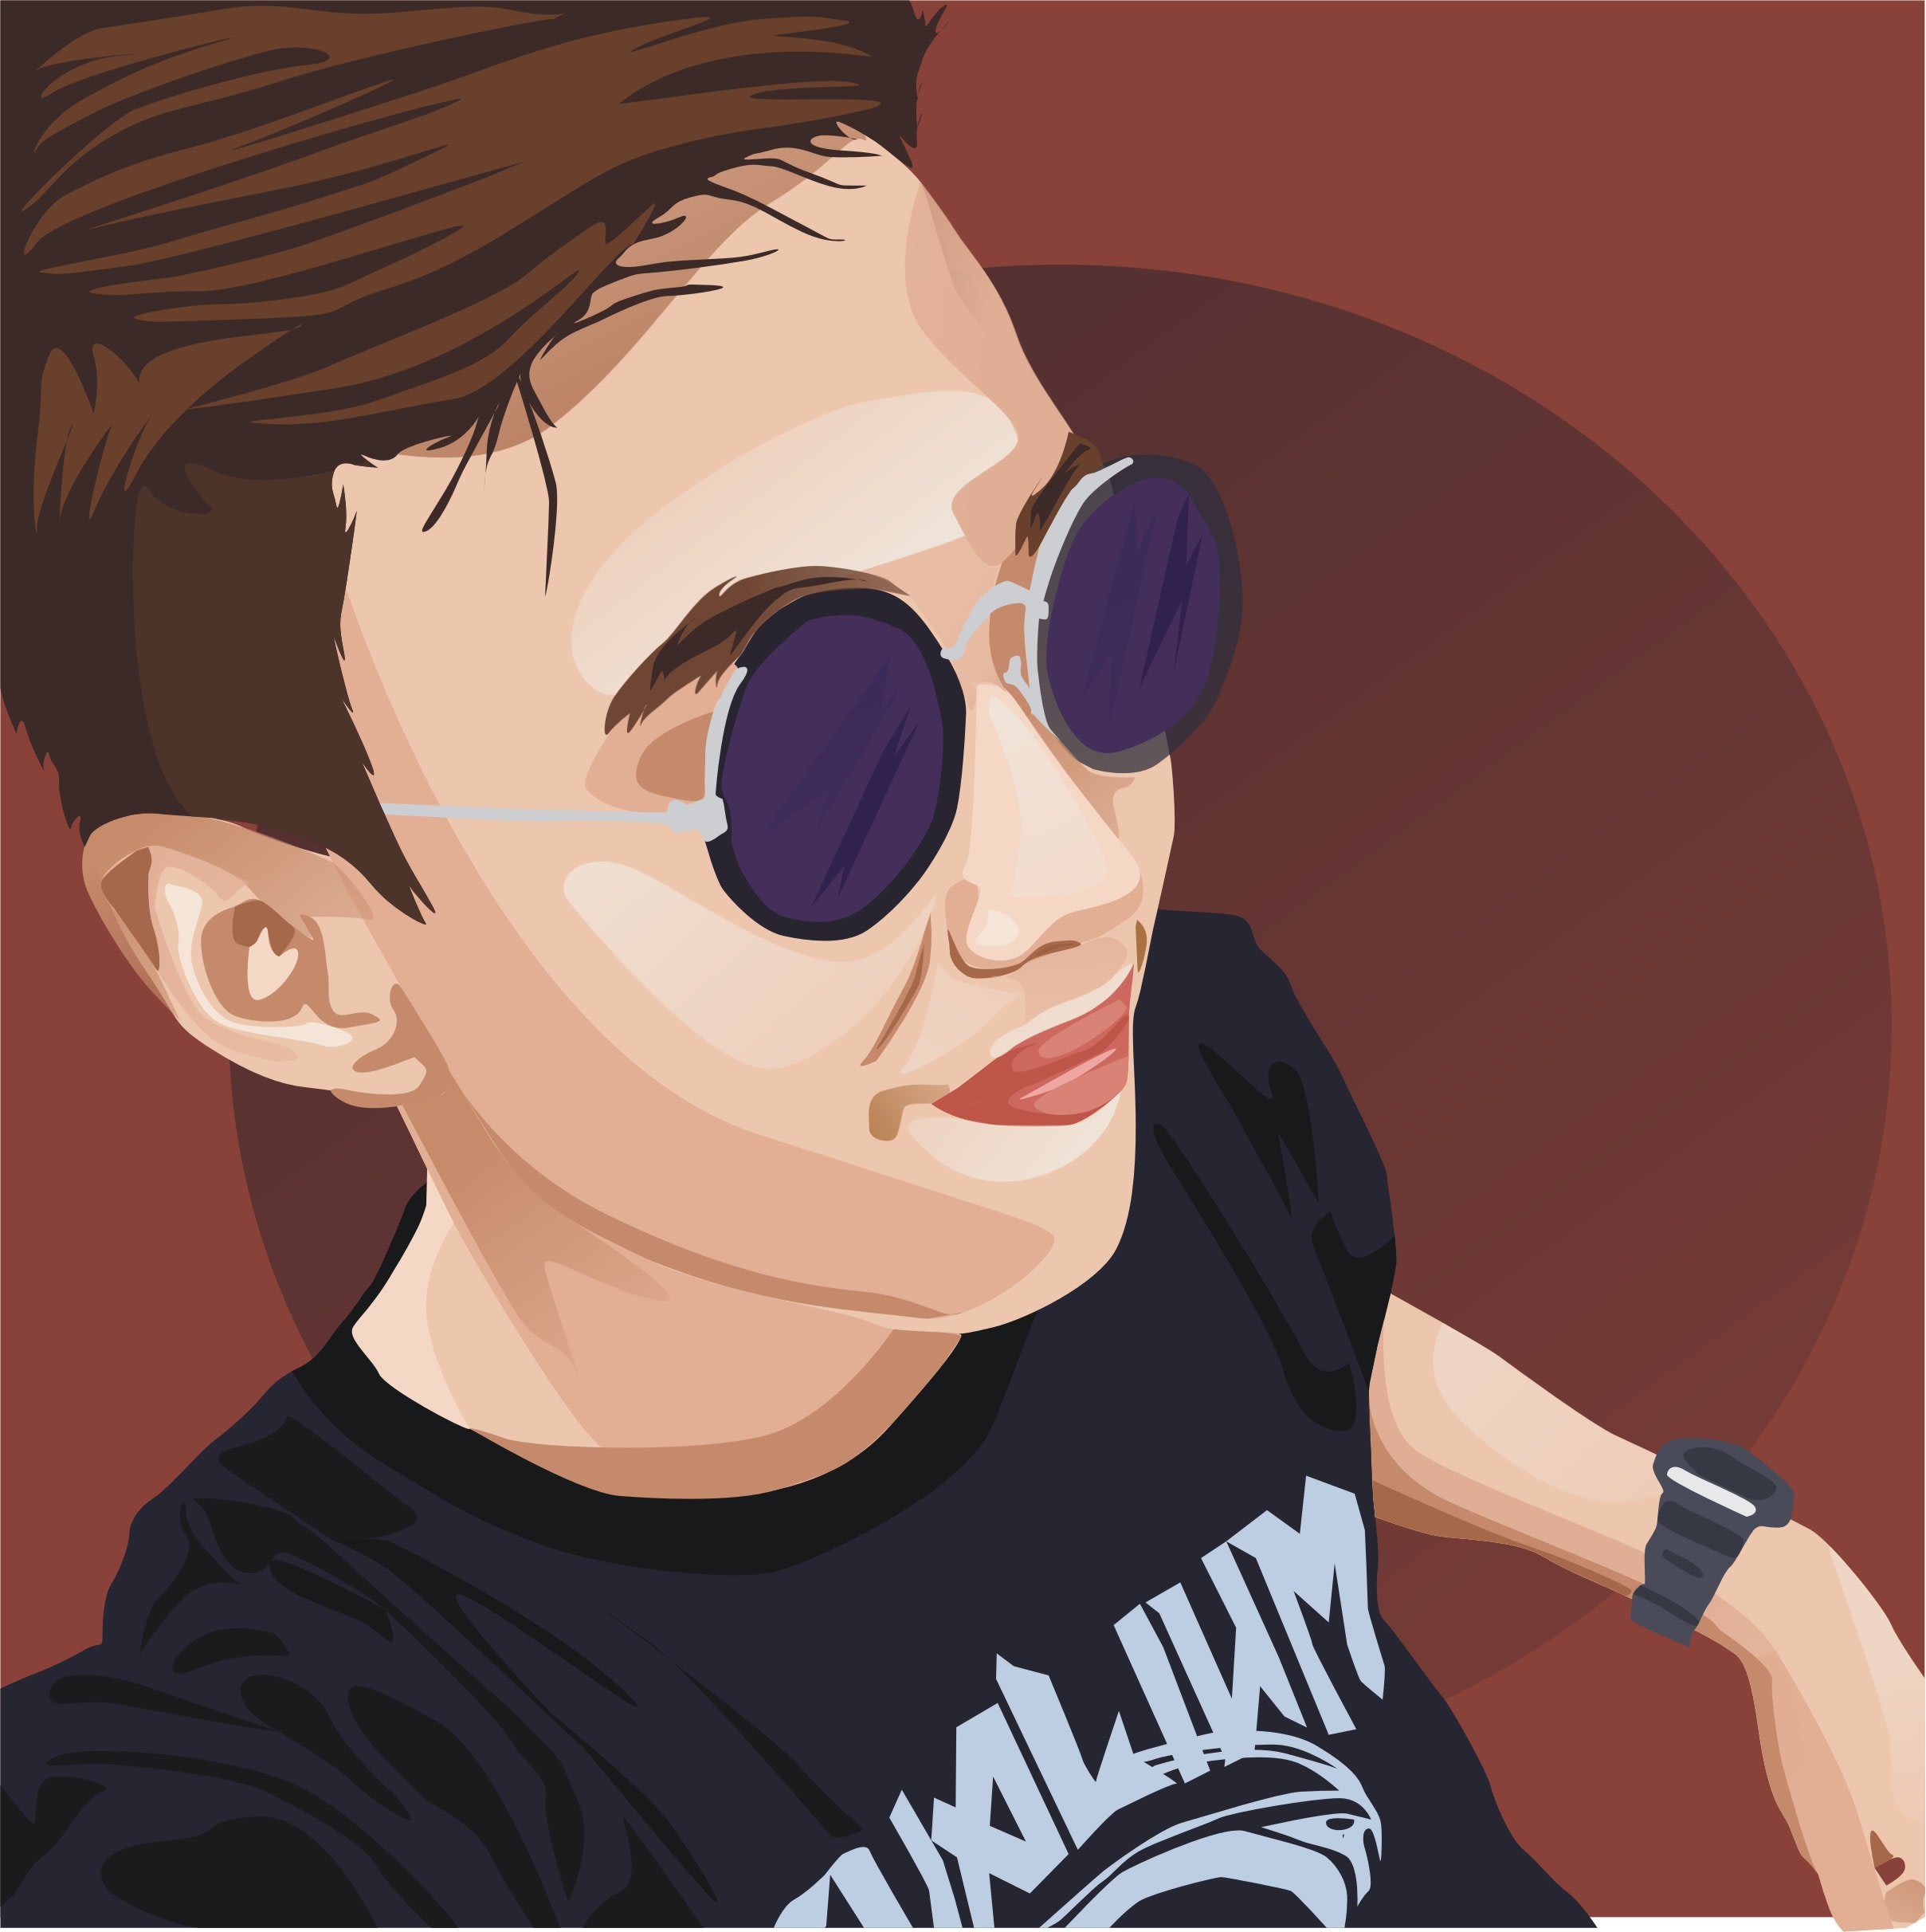 Make your face become a cartoon photo in corel draw by Bagus0 | Fiverr